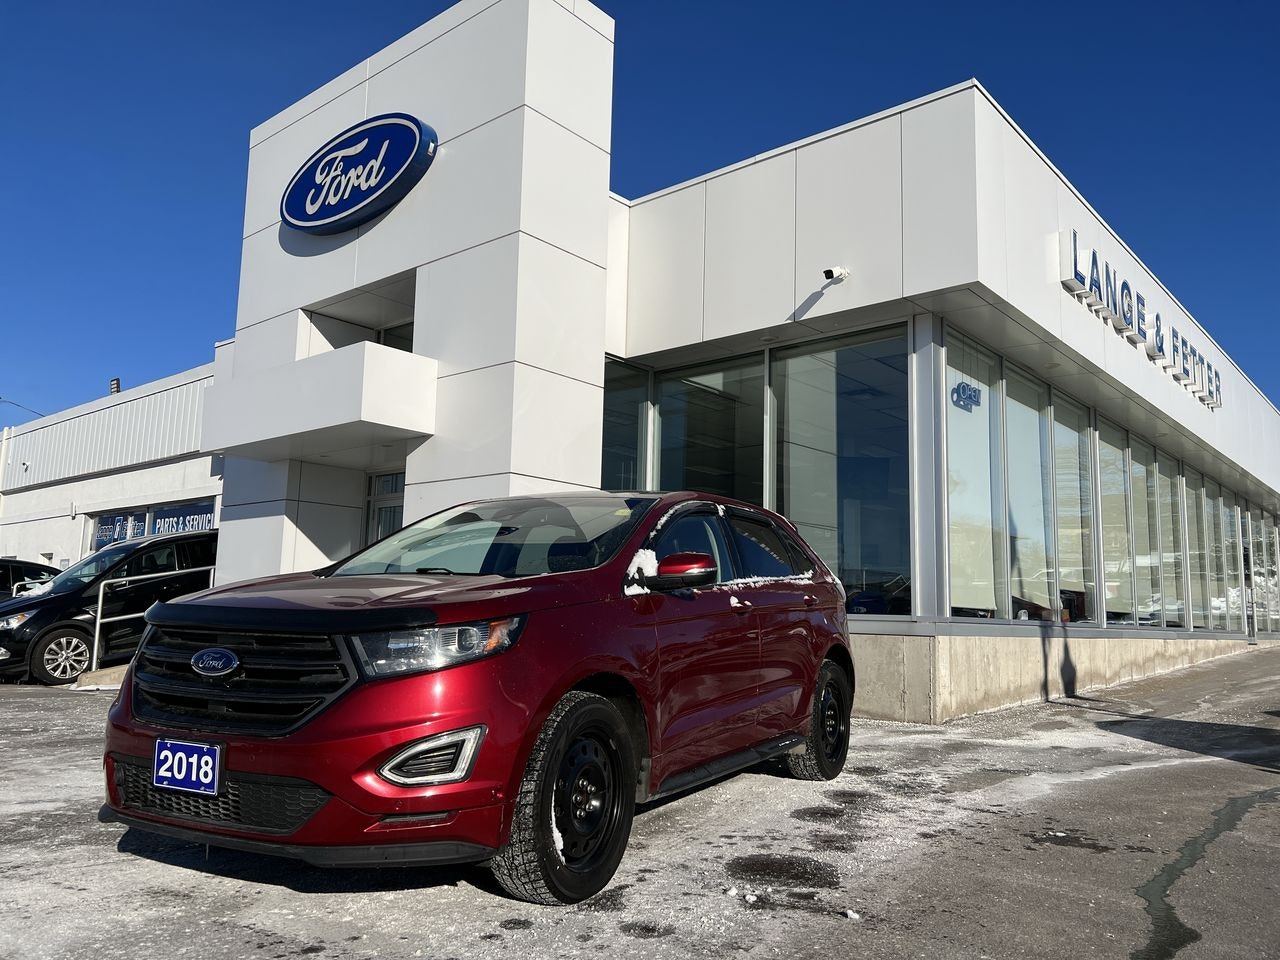 2018 Ford Edge - 20697A Full Image 1